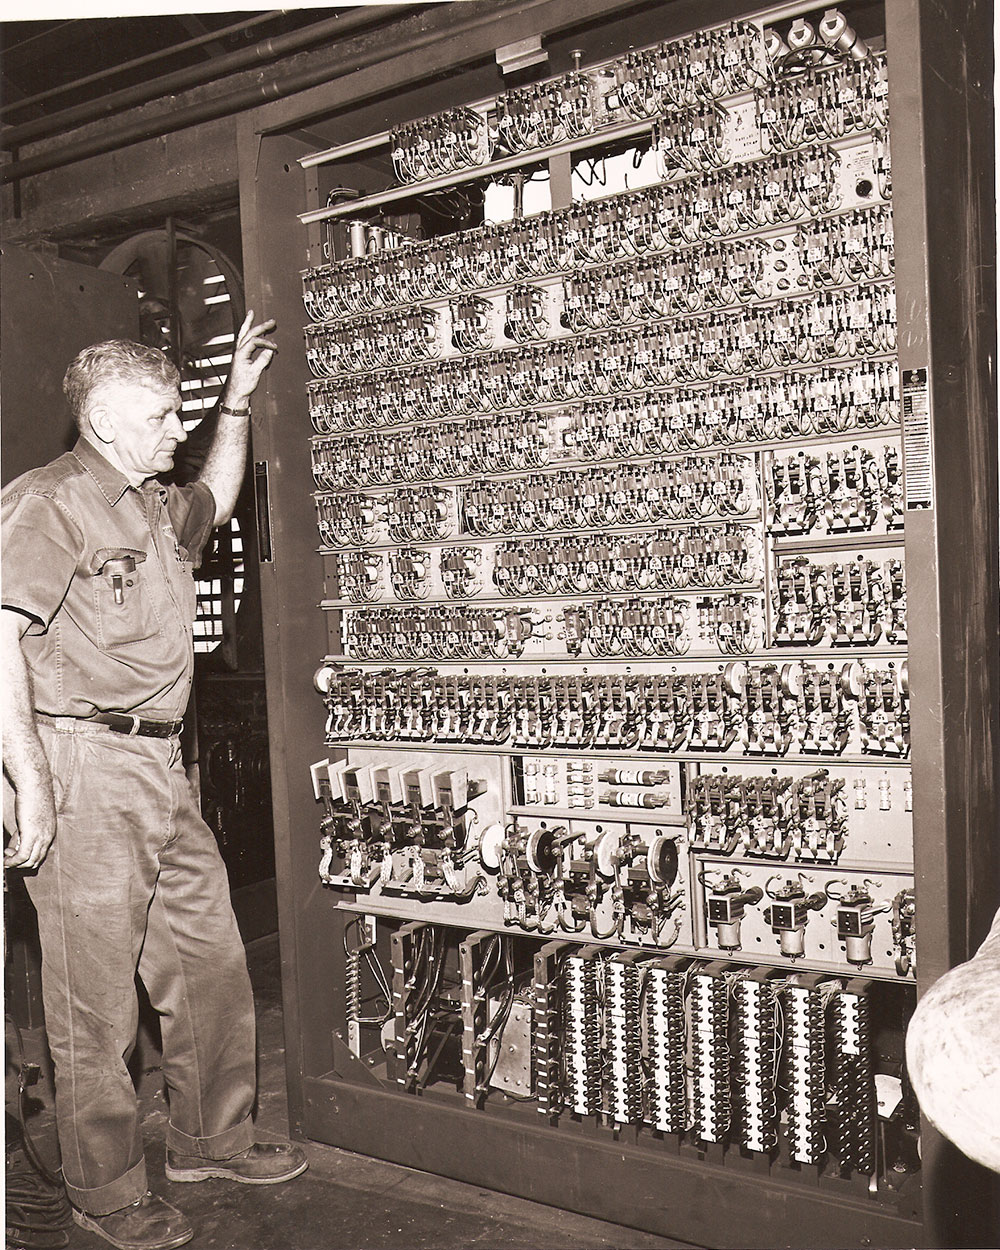 (FNB.2010.6.18) - Electrical Service Area, First National Building, c. 1960